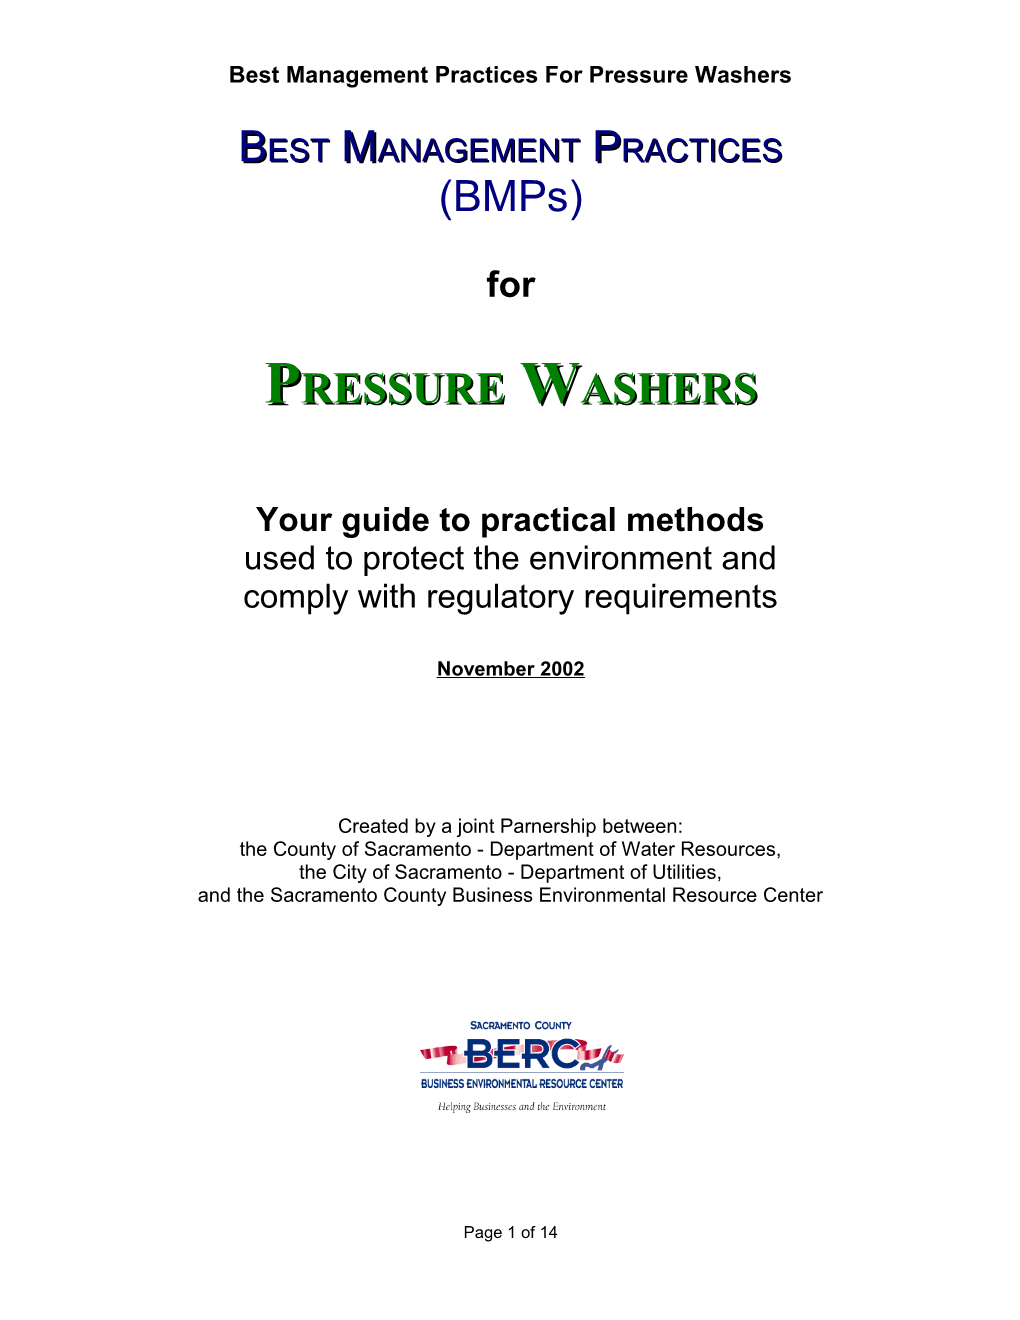 Best Management Practices for Pressure Washers